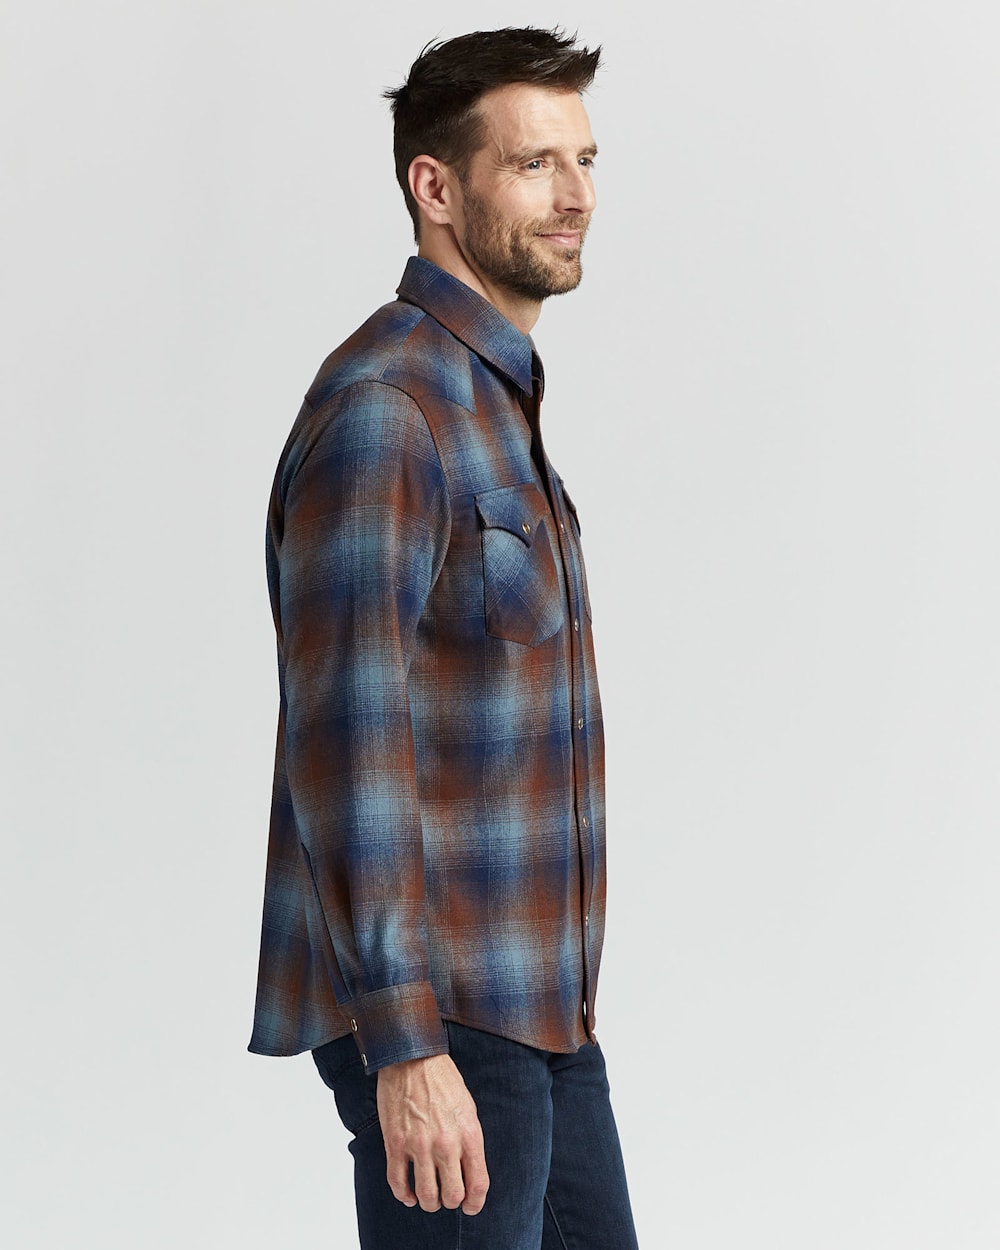 ALTERNATE VIEW OF MEN'S PLAID SNAP-FRONT WESTERN CANYON SHIRT IN BLUE/BROWN OMBRE image number 2